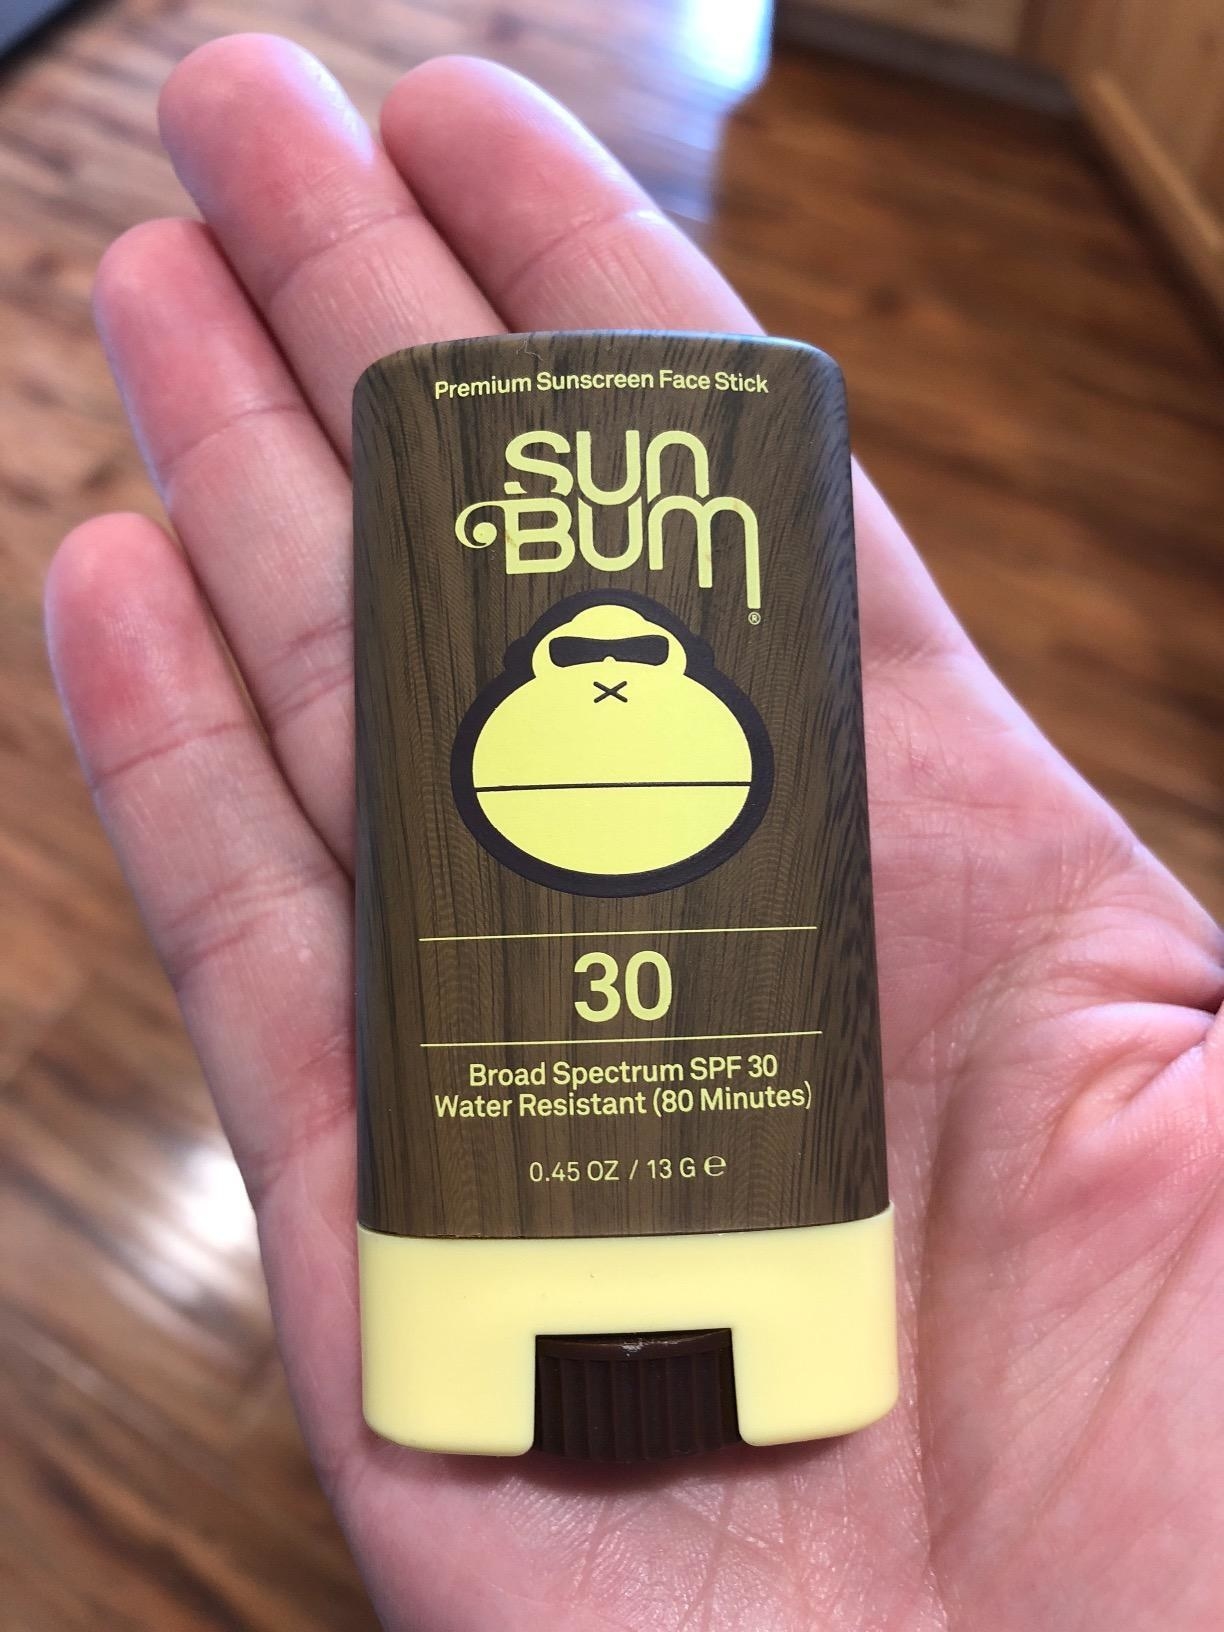 reviewer's photo showing the sunscreen stick in their hand